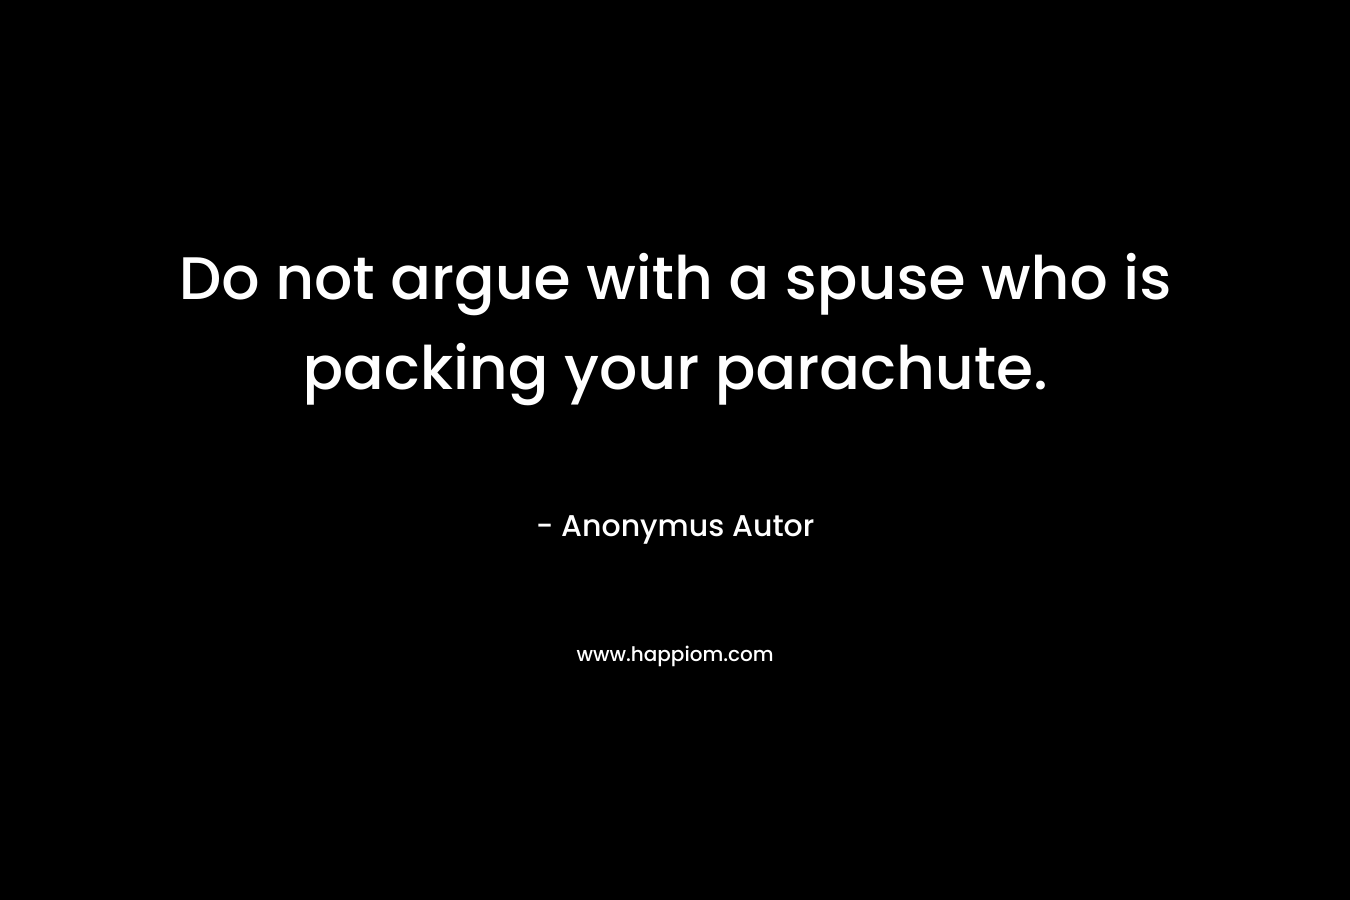 Do not argue with a spuse who is packing your parachute.